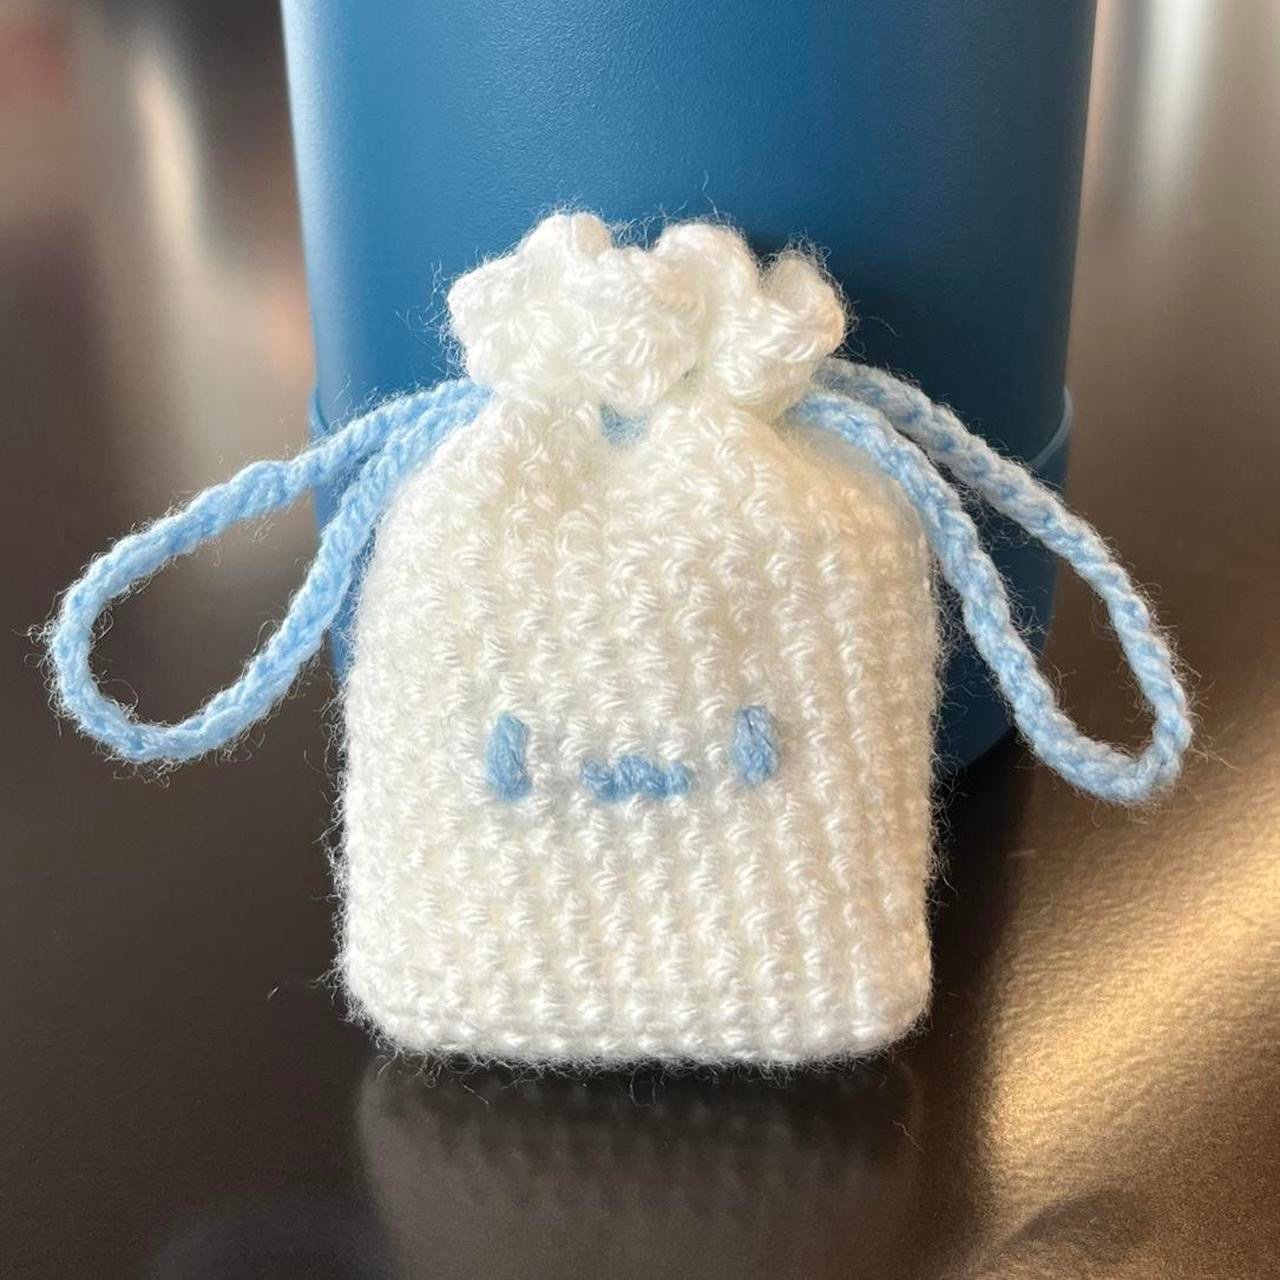 Cinnamoroll airpods pouch OlpgYy4Rp